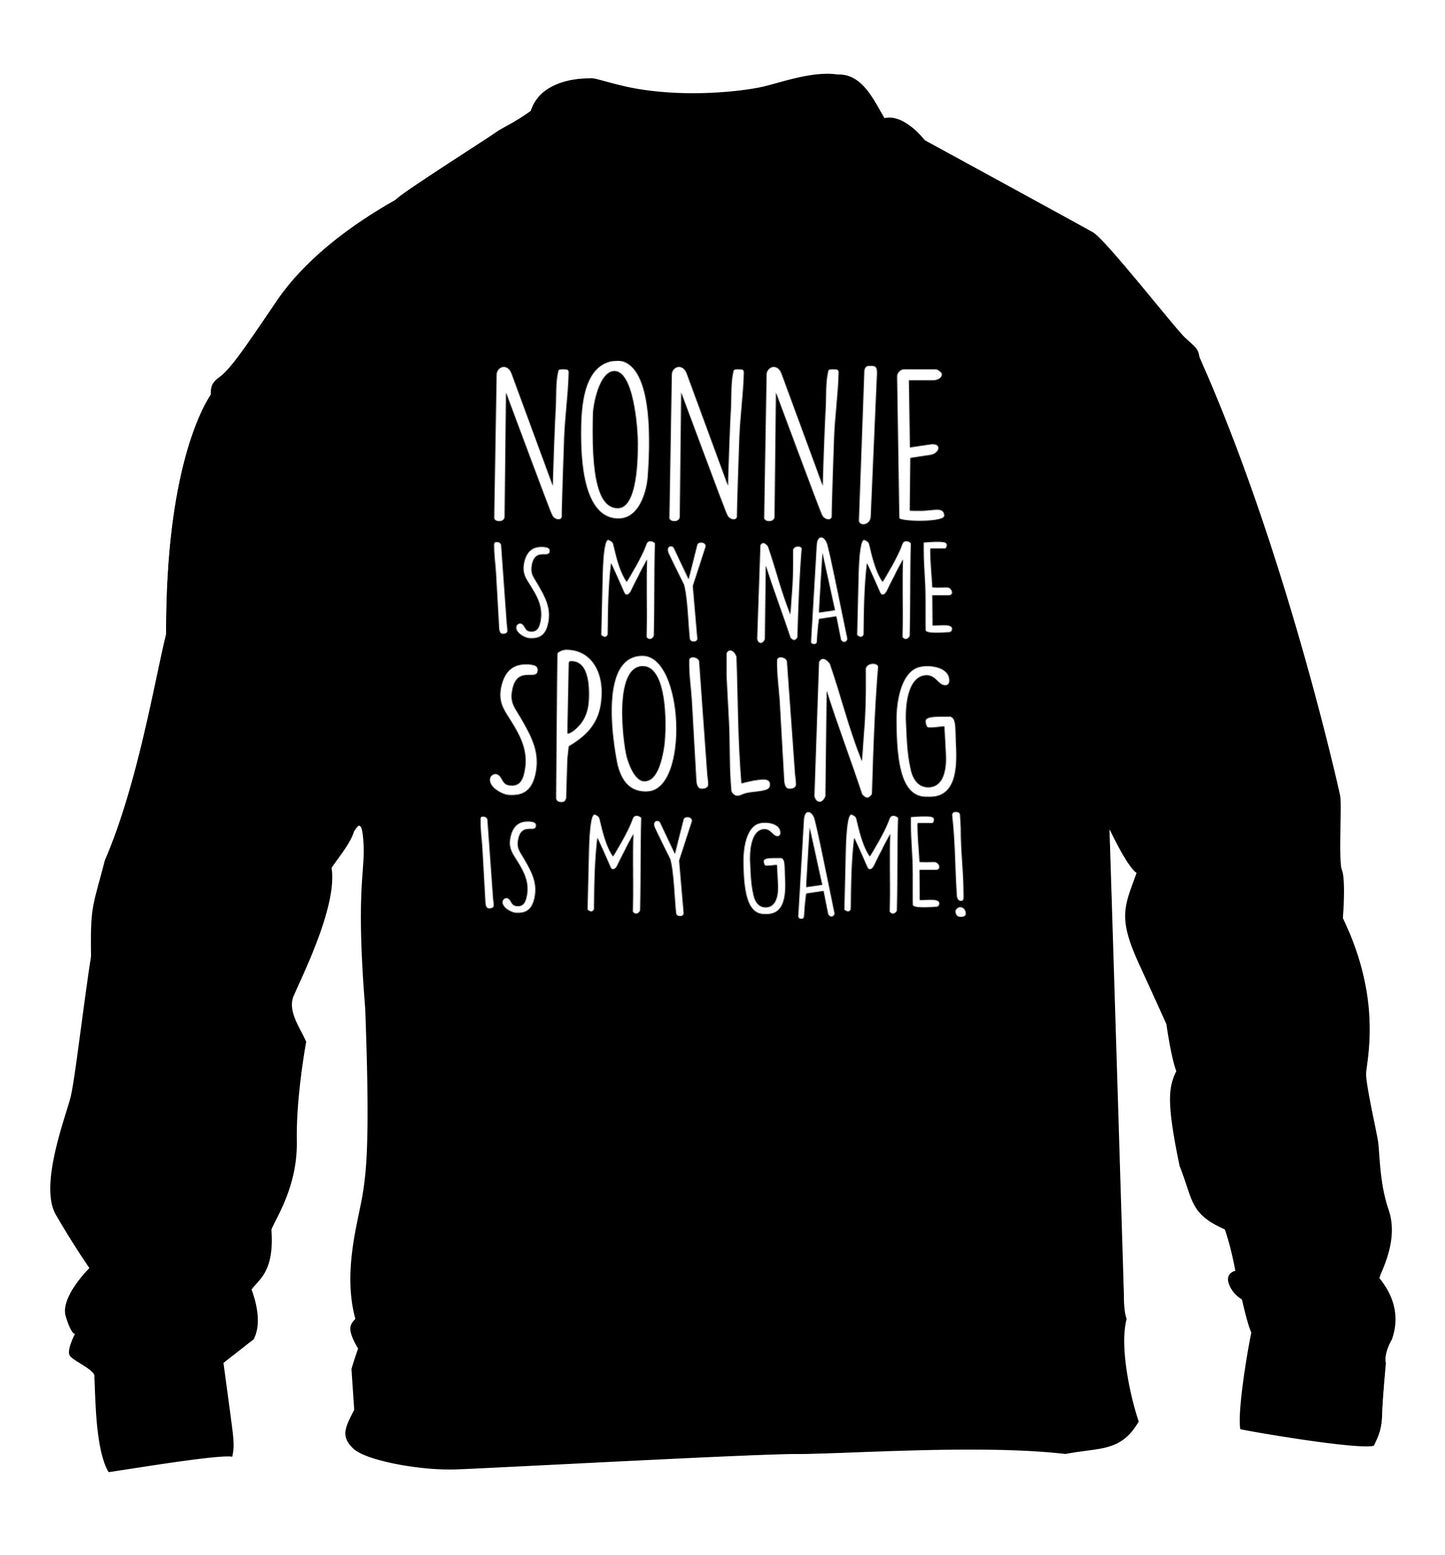 Nonnie is my name, spoiling is my game children's black sweater 12-14 Years